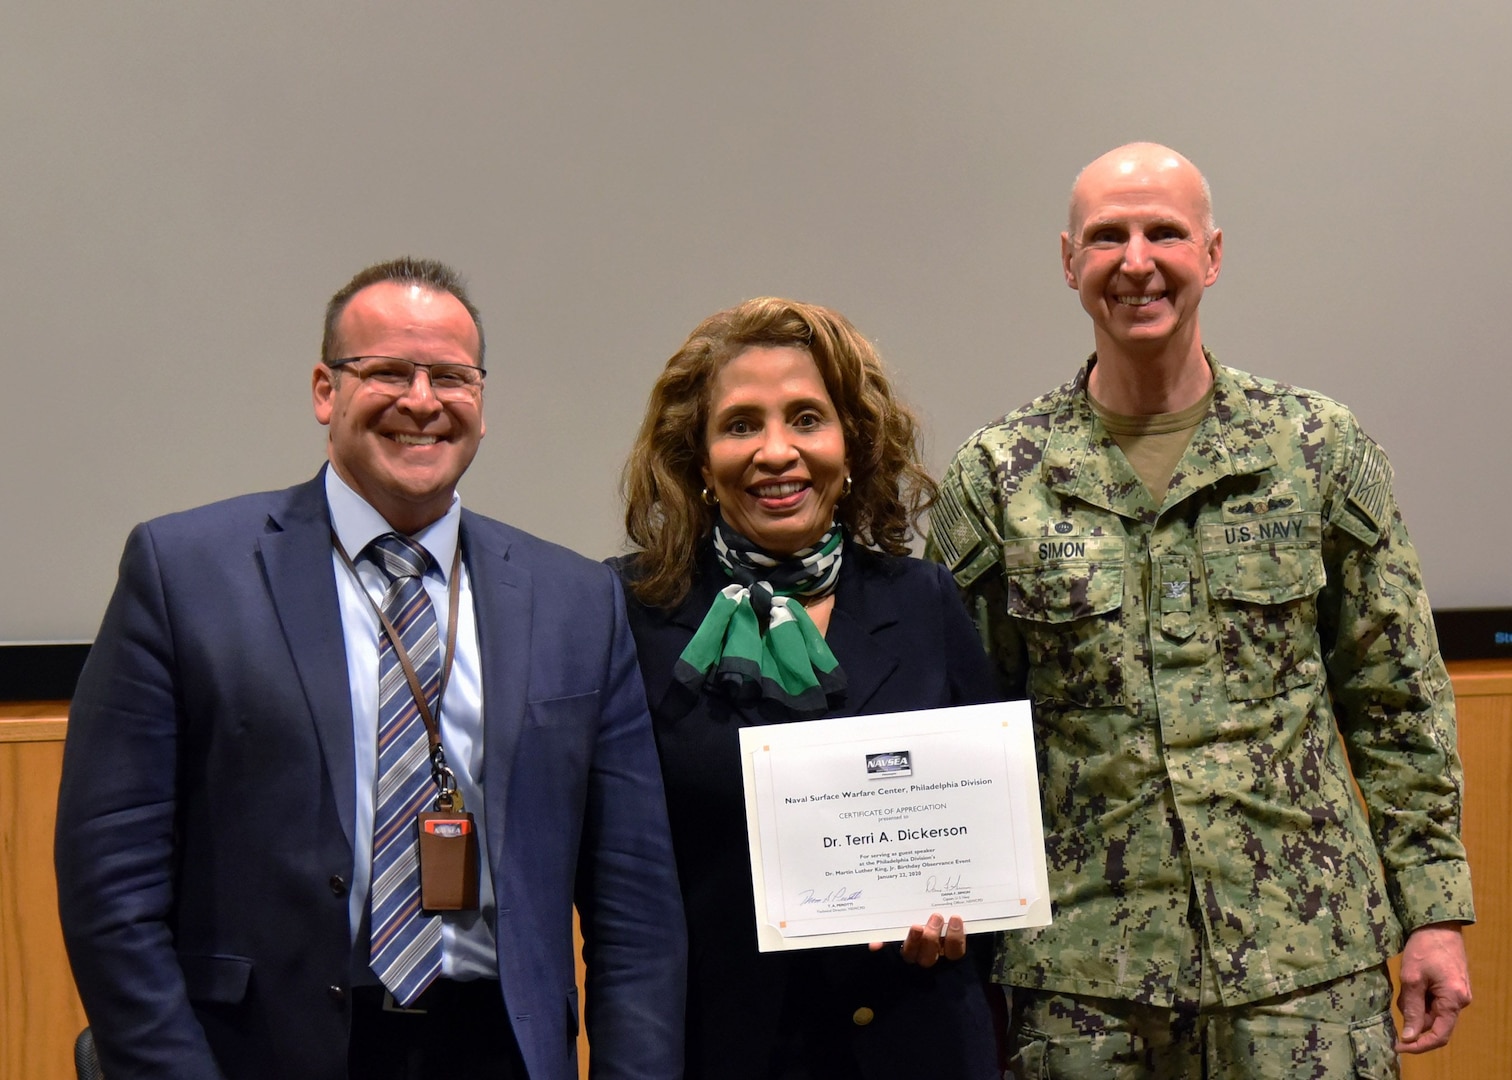 Naval Surface Warfare Center, Philadelphia Division (NSWCPD) Commanding Officer Capt. Dana Simon (right) and Technical Director Tom Perotti (left) presented Dr. Terri A. Dickerson, Director, Civil Rights Directorate, U.S. Coast Guard, with a certificate of appreciation following her remarks at NSWCPD’s Dr. Martin Luther King Jr. Birthday Observance on Jan. 22. Dickerson shared her story from being a member of the first class to integrate the New Orleans Catholic school system to a member of the Senior Executive Service (SES). (U.S. Navy Photo by Kirsten. St. Peter/Released)